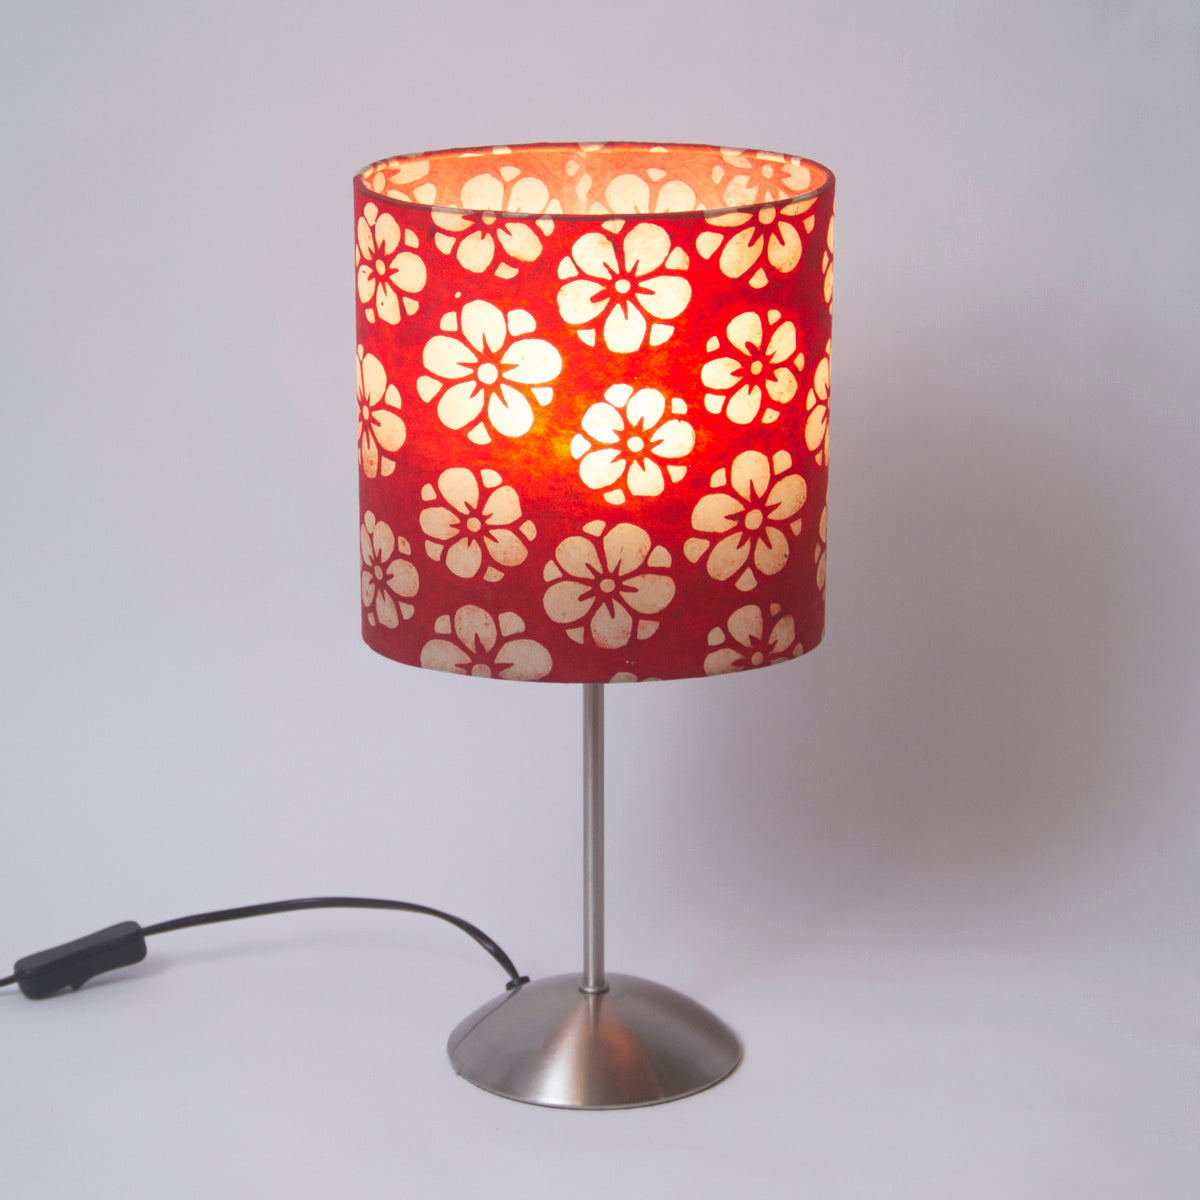 Tall Stem Table Lamp Base with Oval Lamp Shade P76 (20cm wide x 20cm high x 13cm deep)